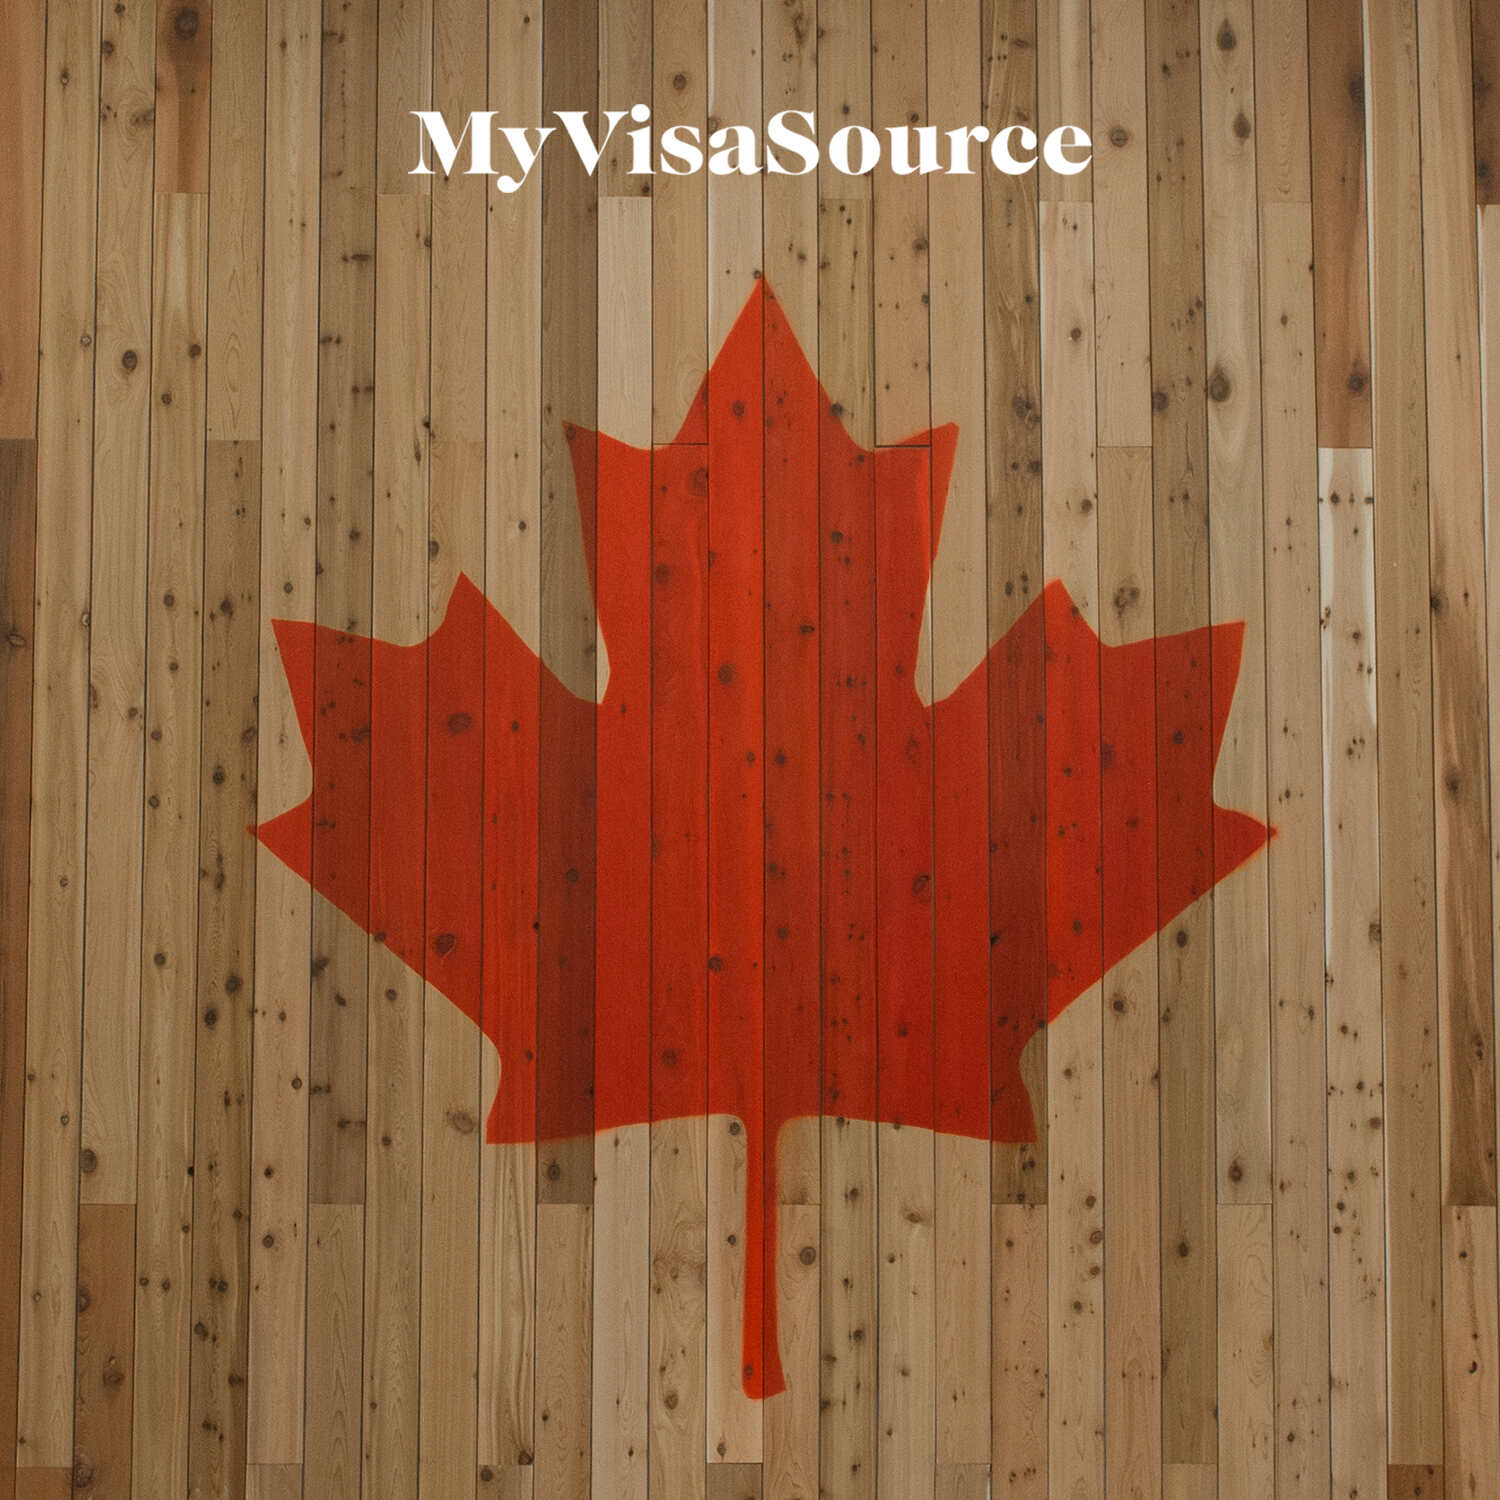 canadian red maple leaf over painted over wood panel my visa source